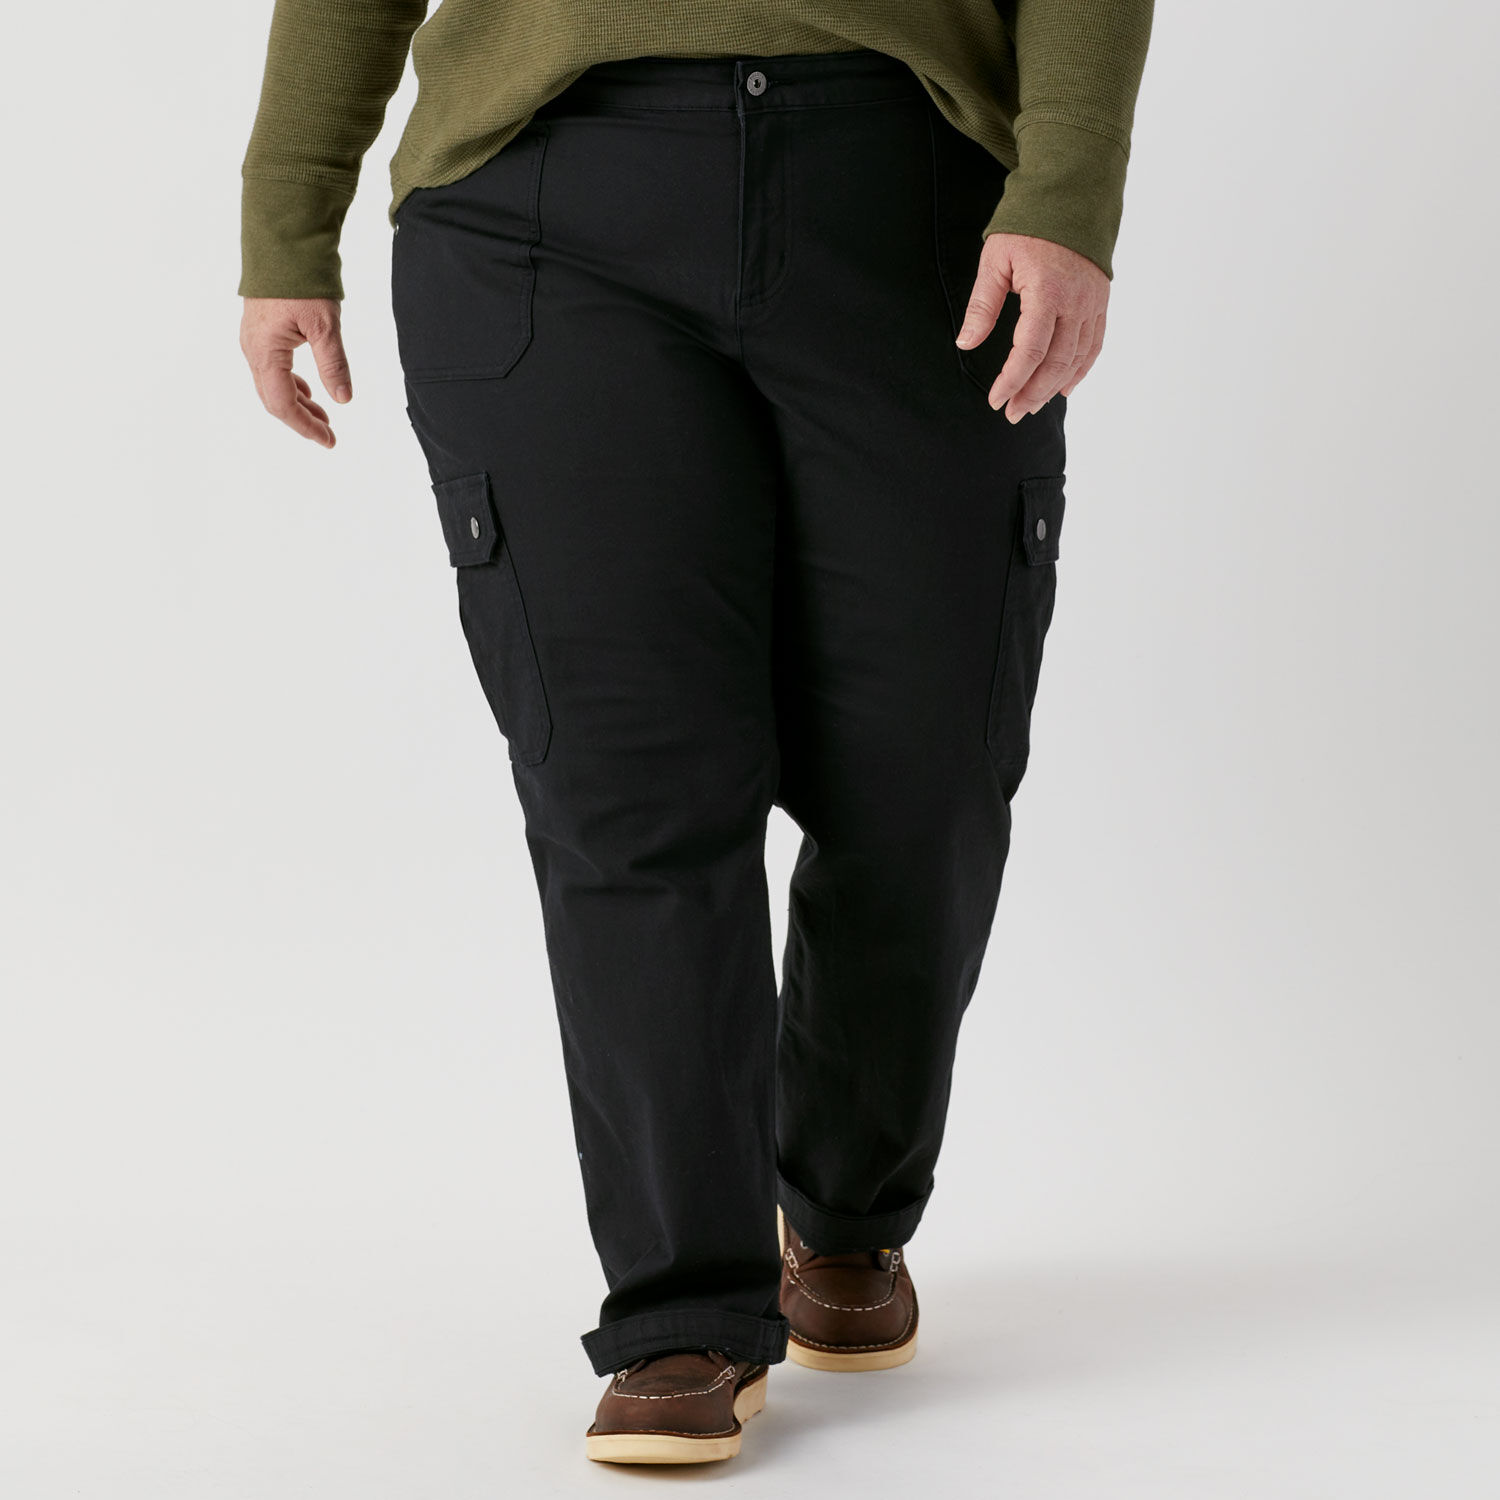 Shop Comfortable and Functional Work Cargo Pants & Shorts